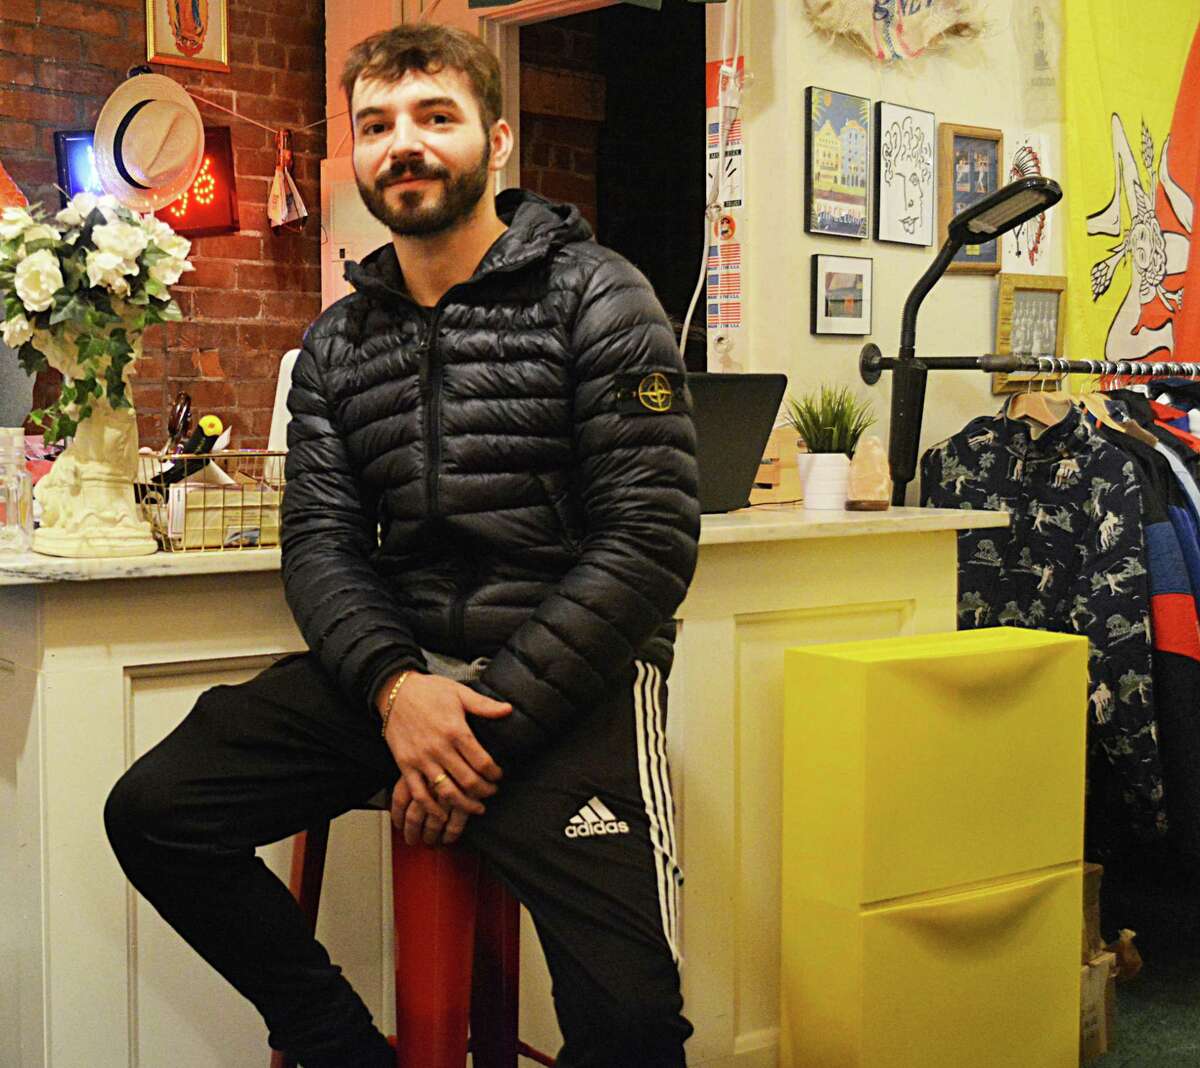 Middletown’s First Twelve urban clothing boutique in Main Street Market is run by Middletown High School and Central Connecticut State University graduate Dillon Milardo, 25, who began the business venture with the help of his college roommate Dave Ambrose. The company is rooted in their college days, when Milardo took every item out of his dorm room closet and filled it with First Twelve merchandise, creating a “pop-up” shop where his classmates could buy items on the spot.